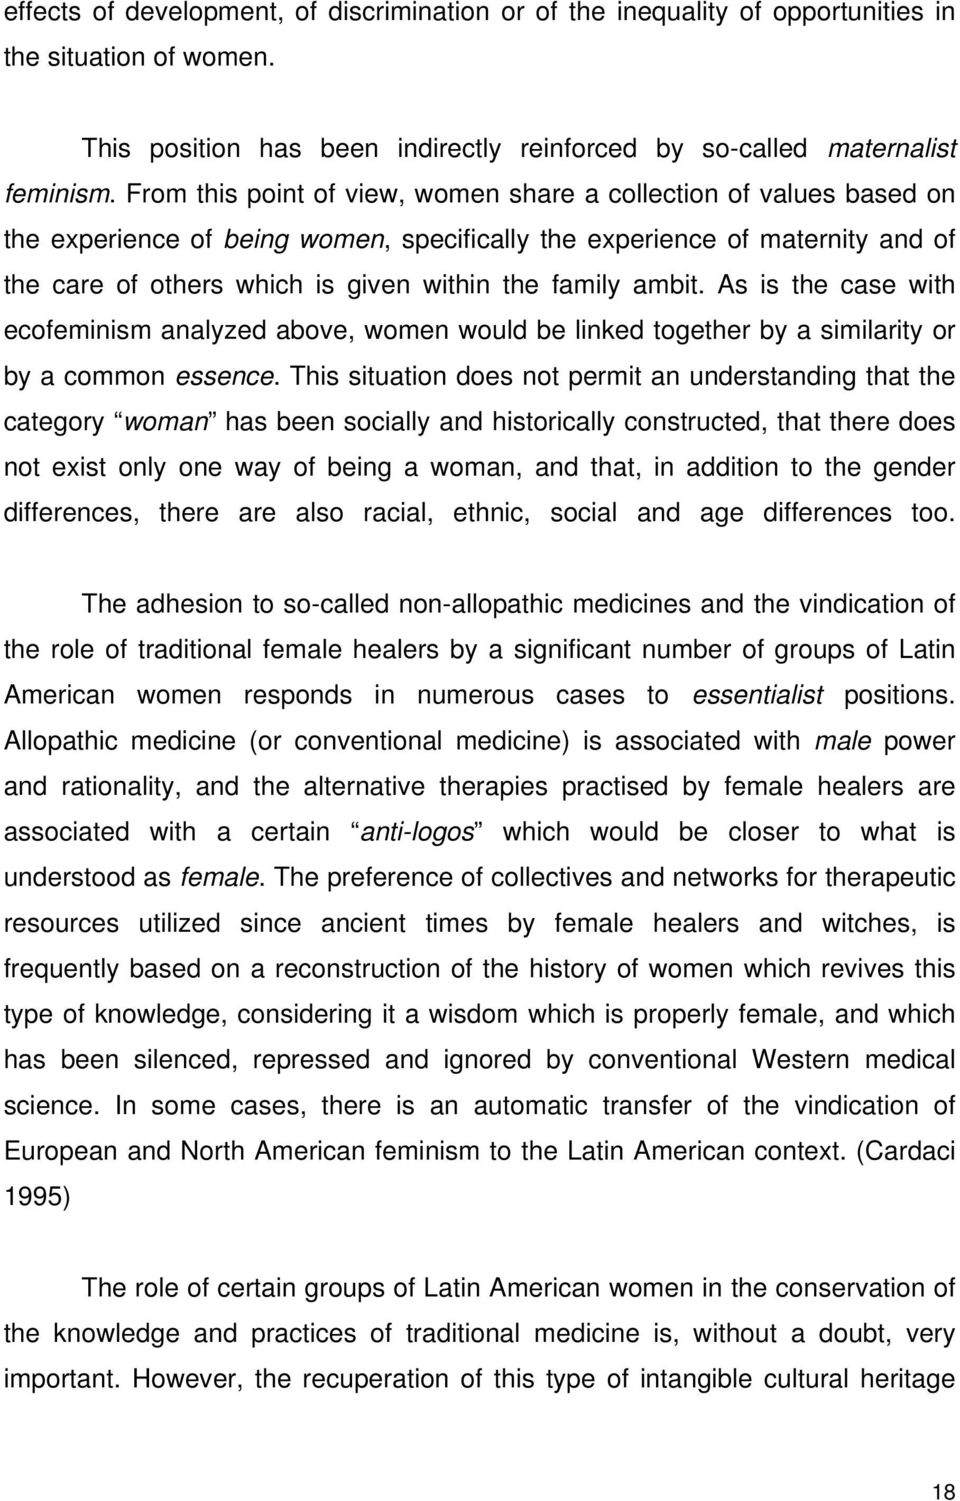 ambit. As is the case with ecofeminism analyzed above, women would be linked together by a similarity or by a common essence.